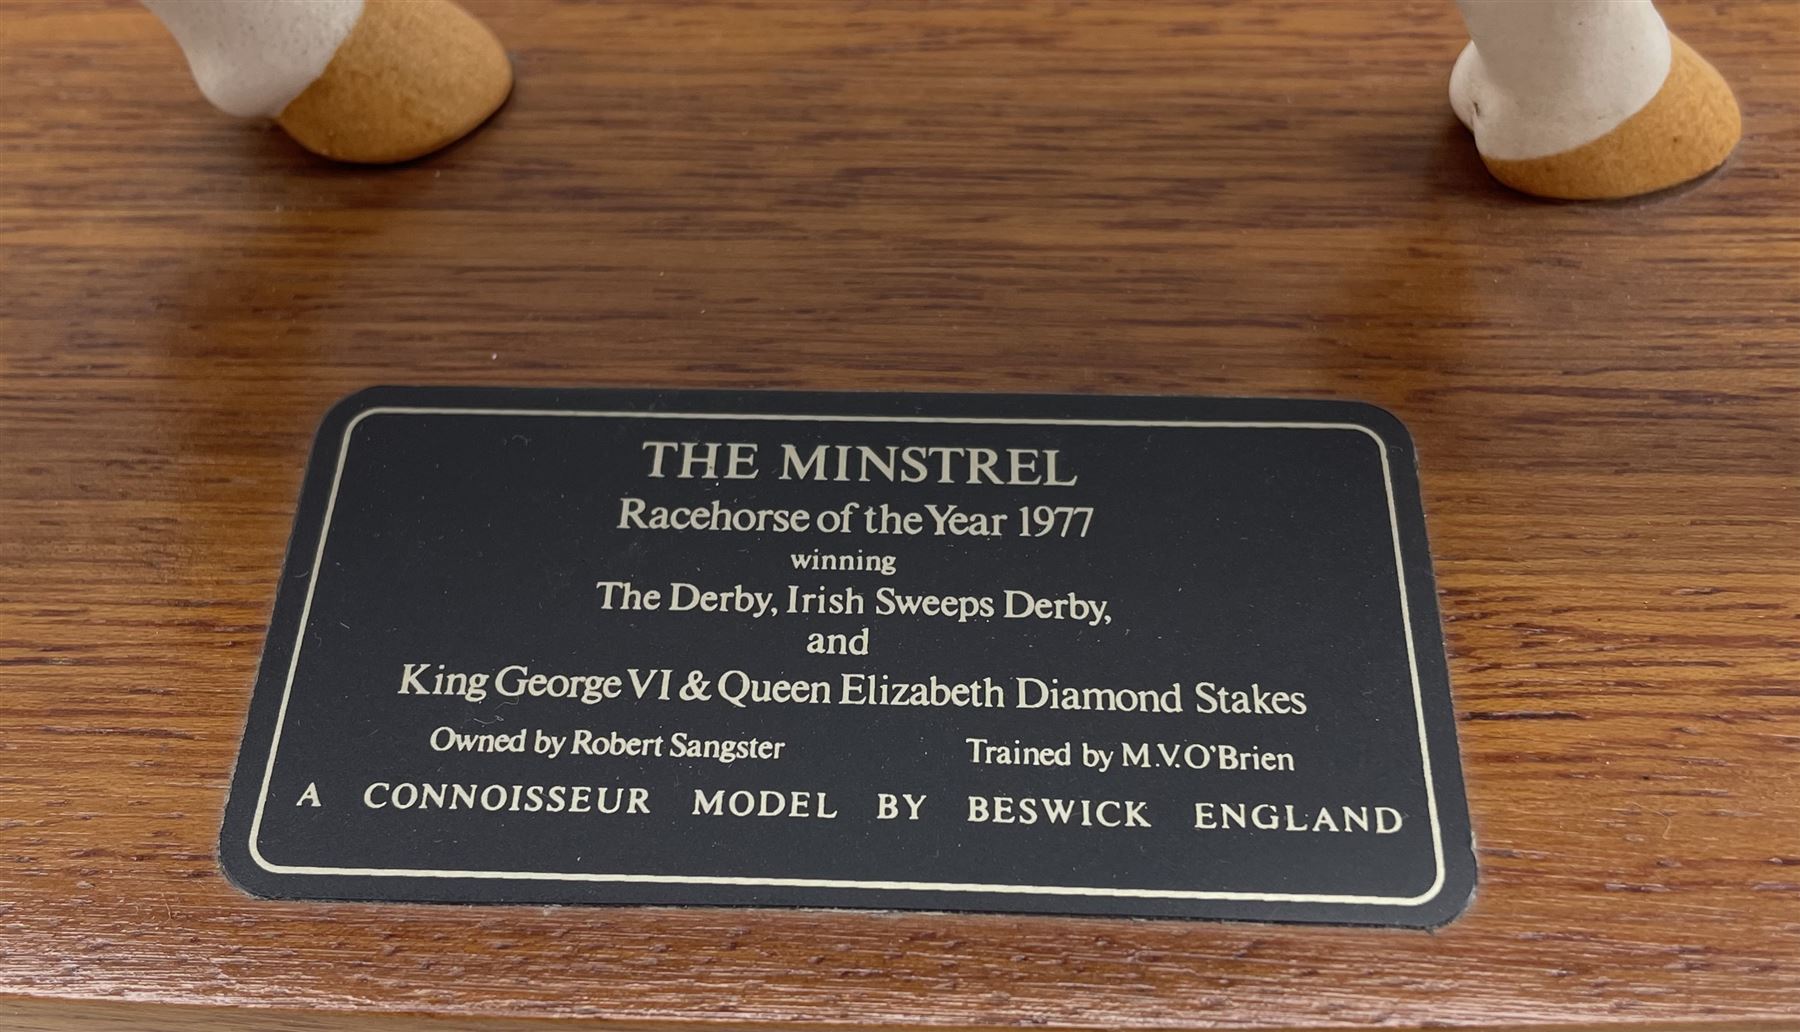 Beswick model of 'The Minstrel' Racehorse of the Year 1977 from the Connoisseur series on wooden pli - Image 2 of 2